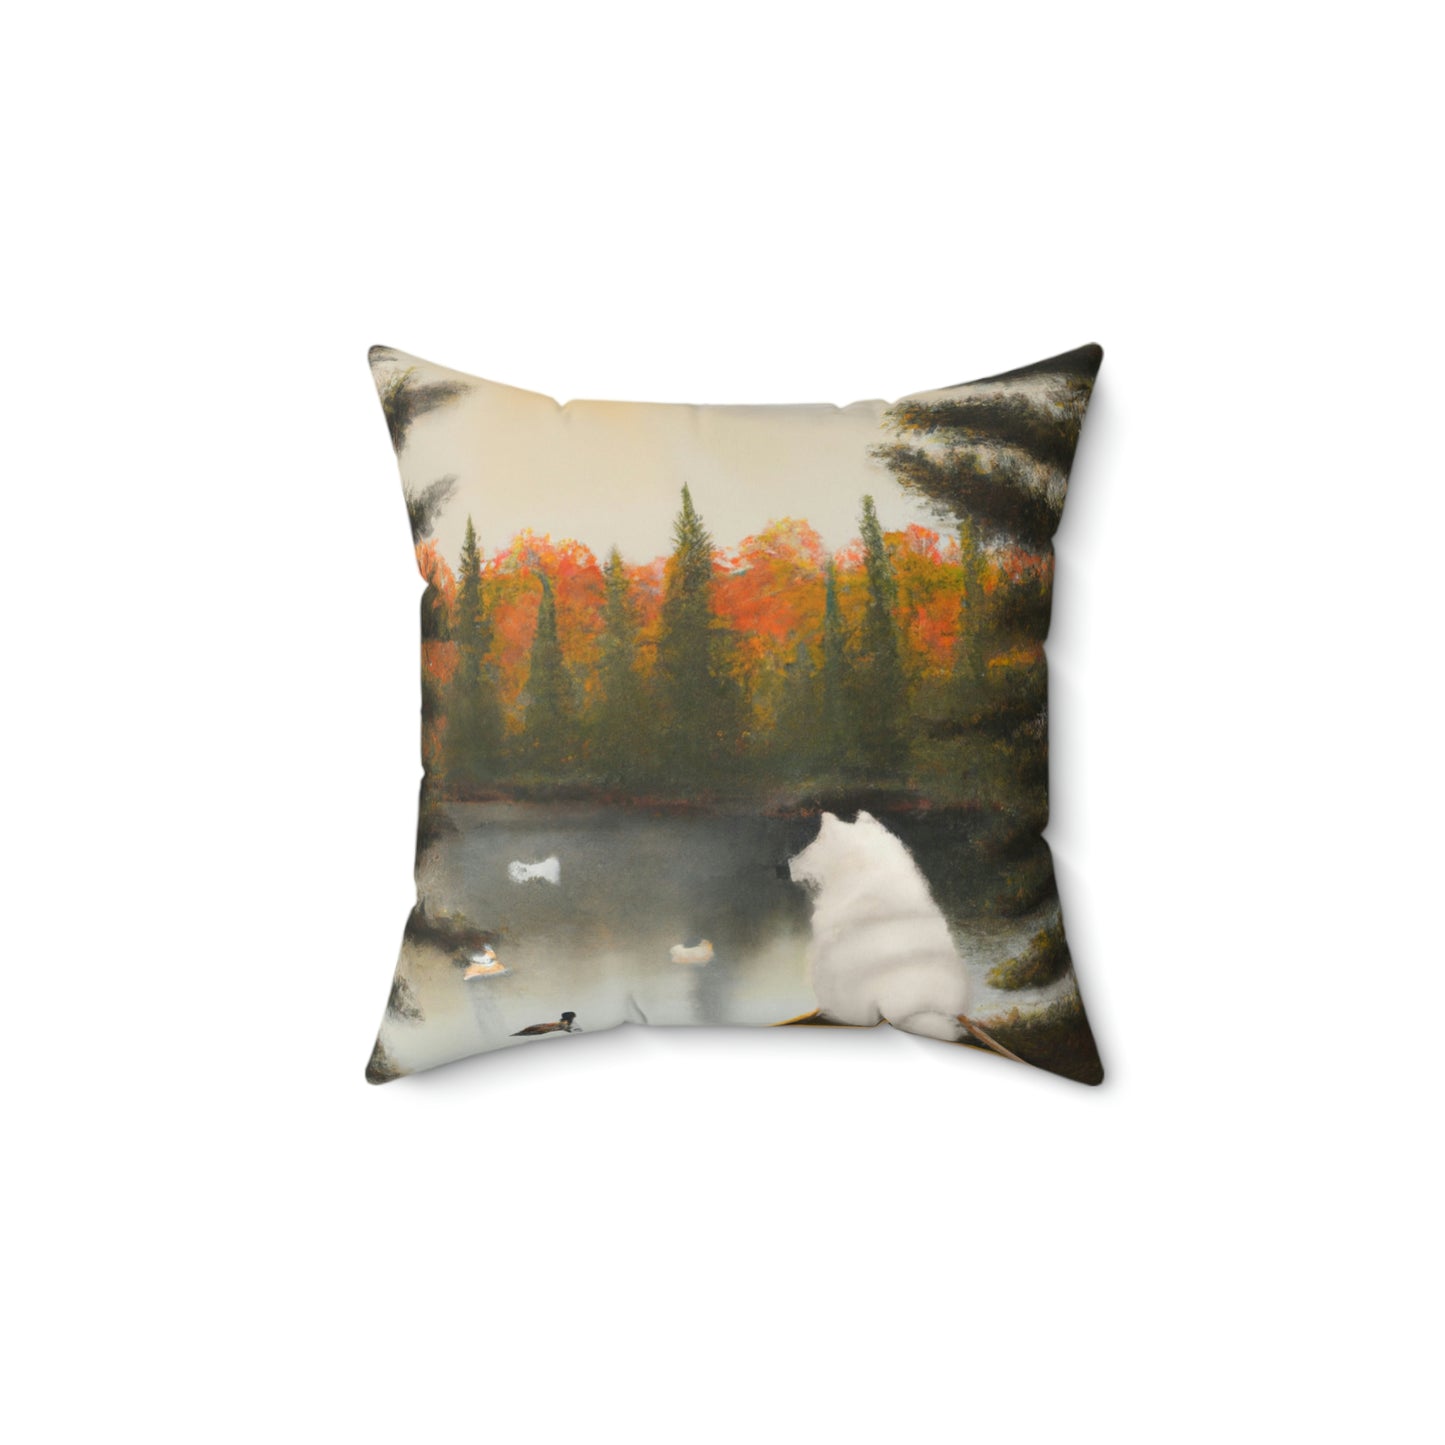 Samoyed on Fall Pond with Ducks: Spun Polyester Square Pillow